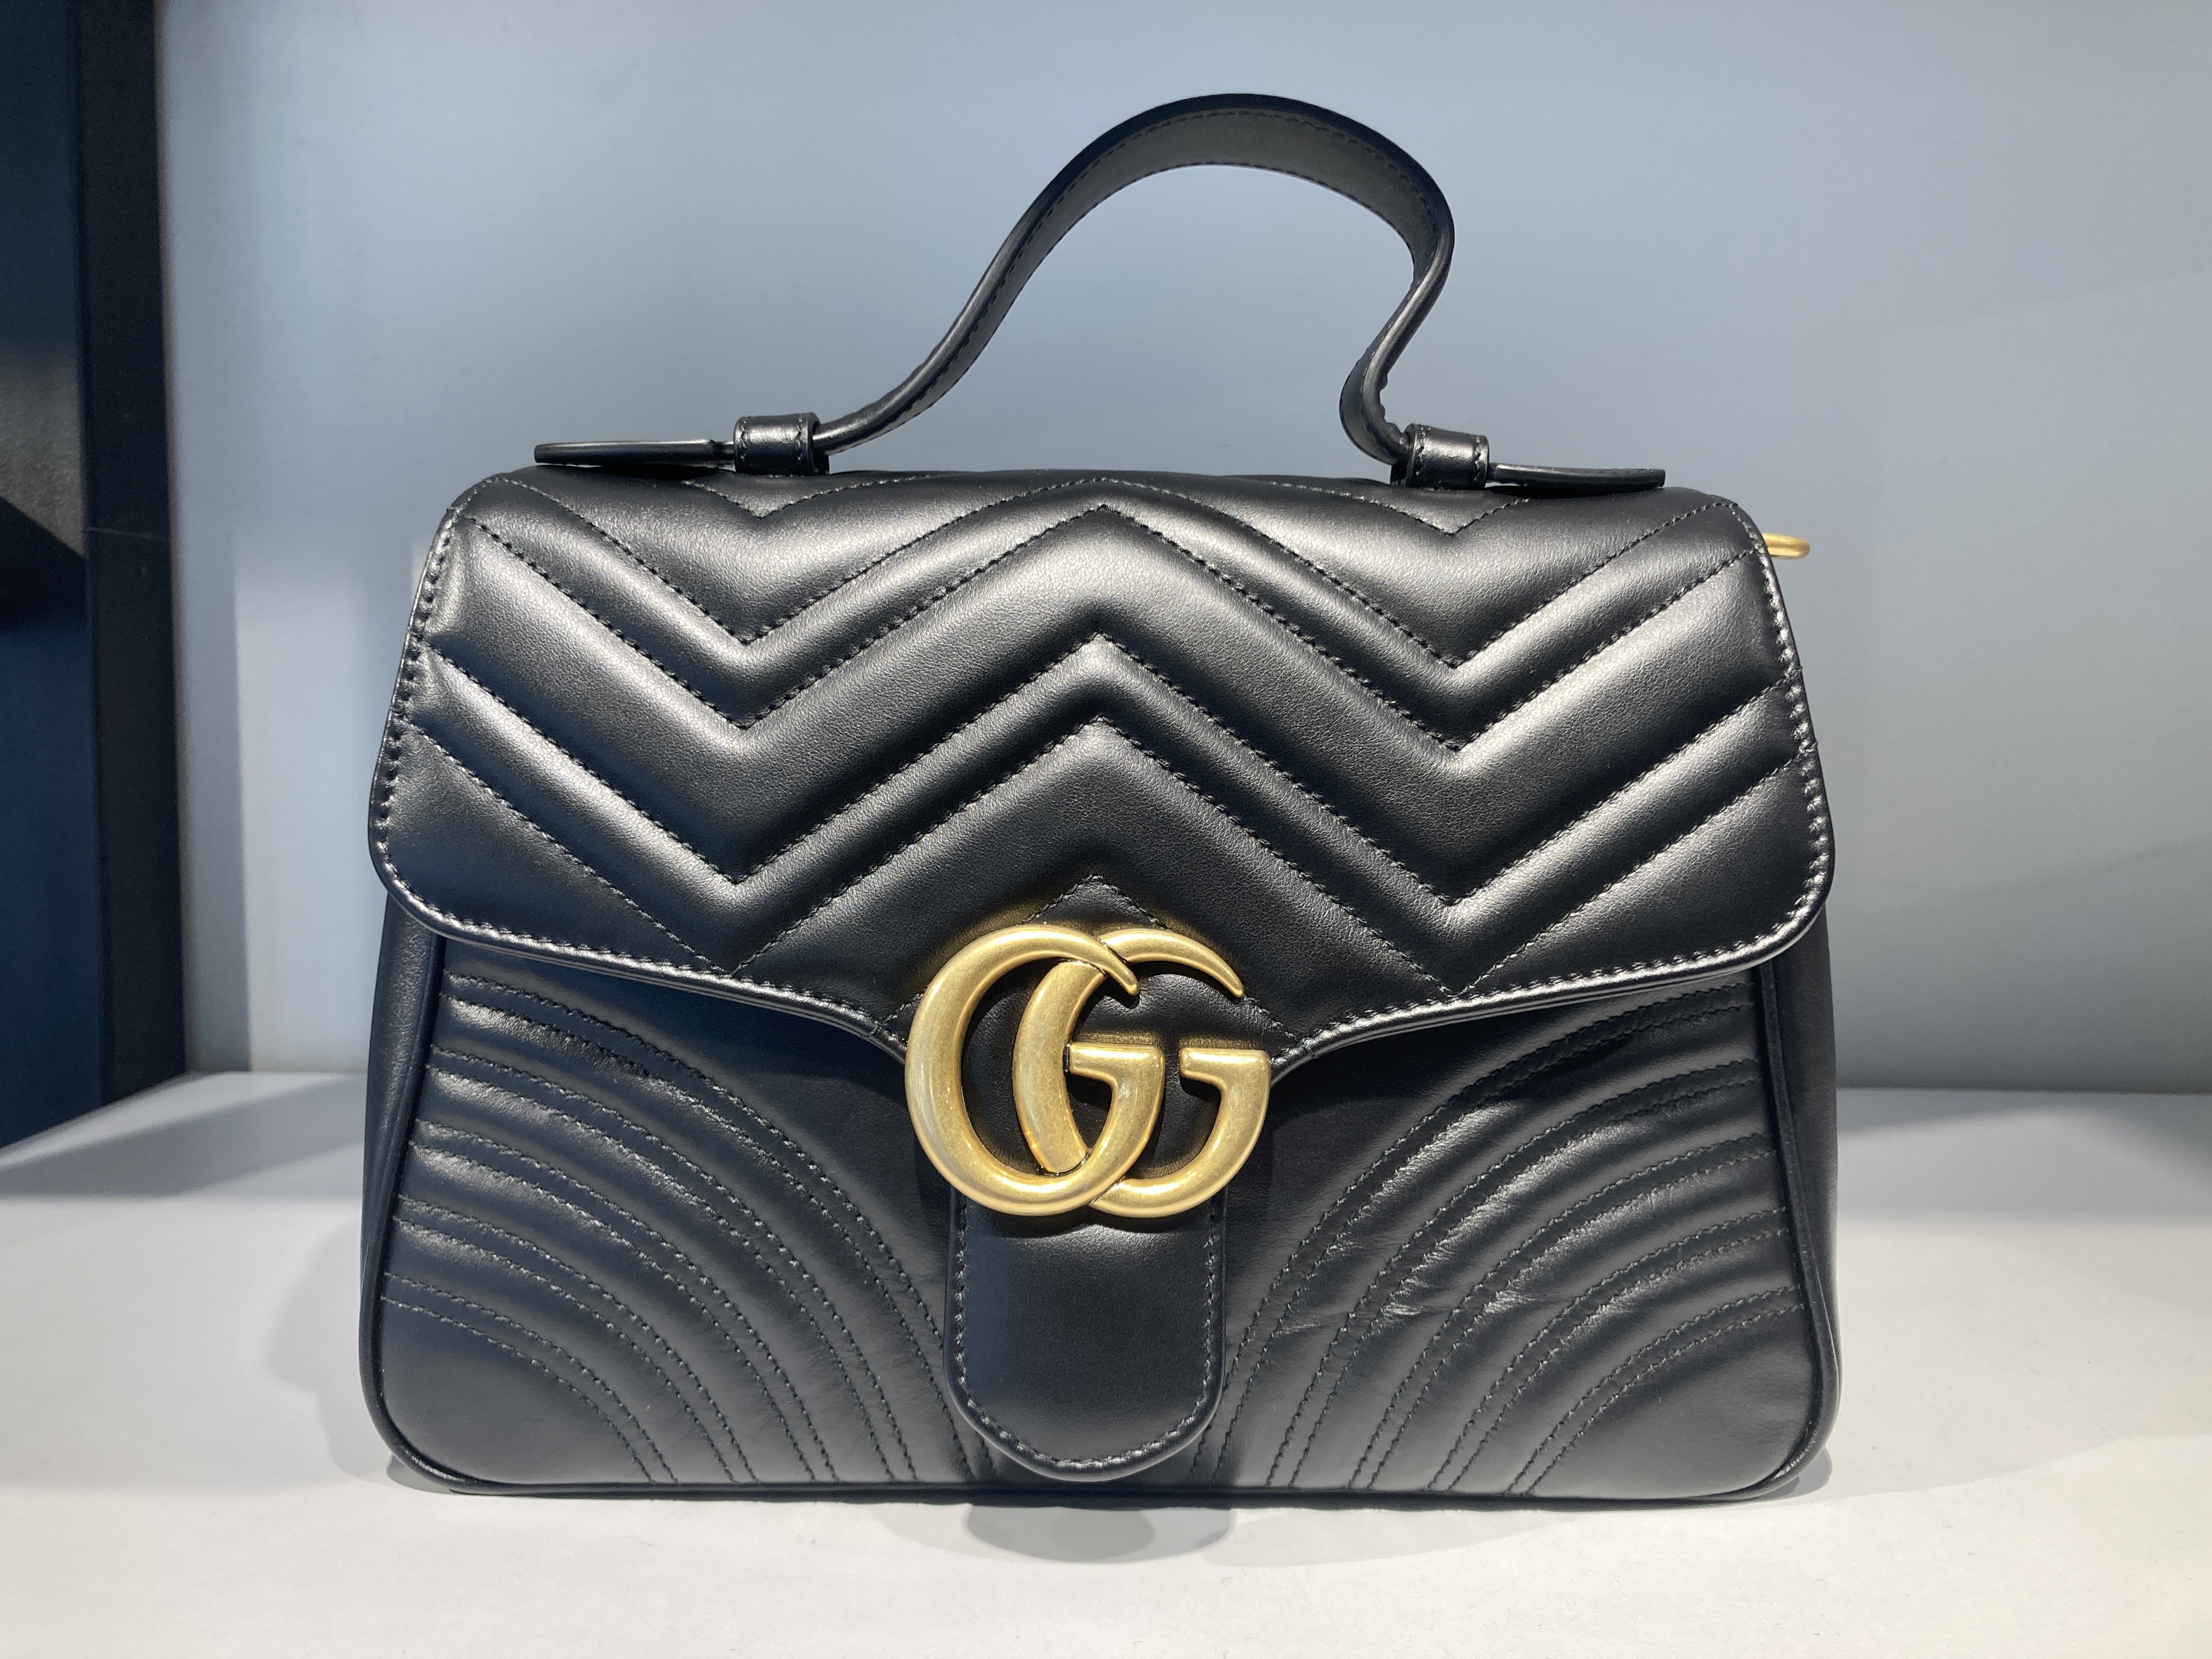 Gucci x Balenciaga “Hacker Project”: Not Just Another Collaboration |  Handbags and Accessories | Sotheby's